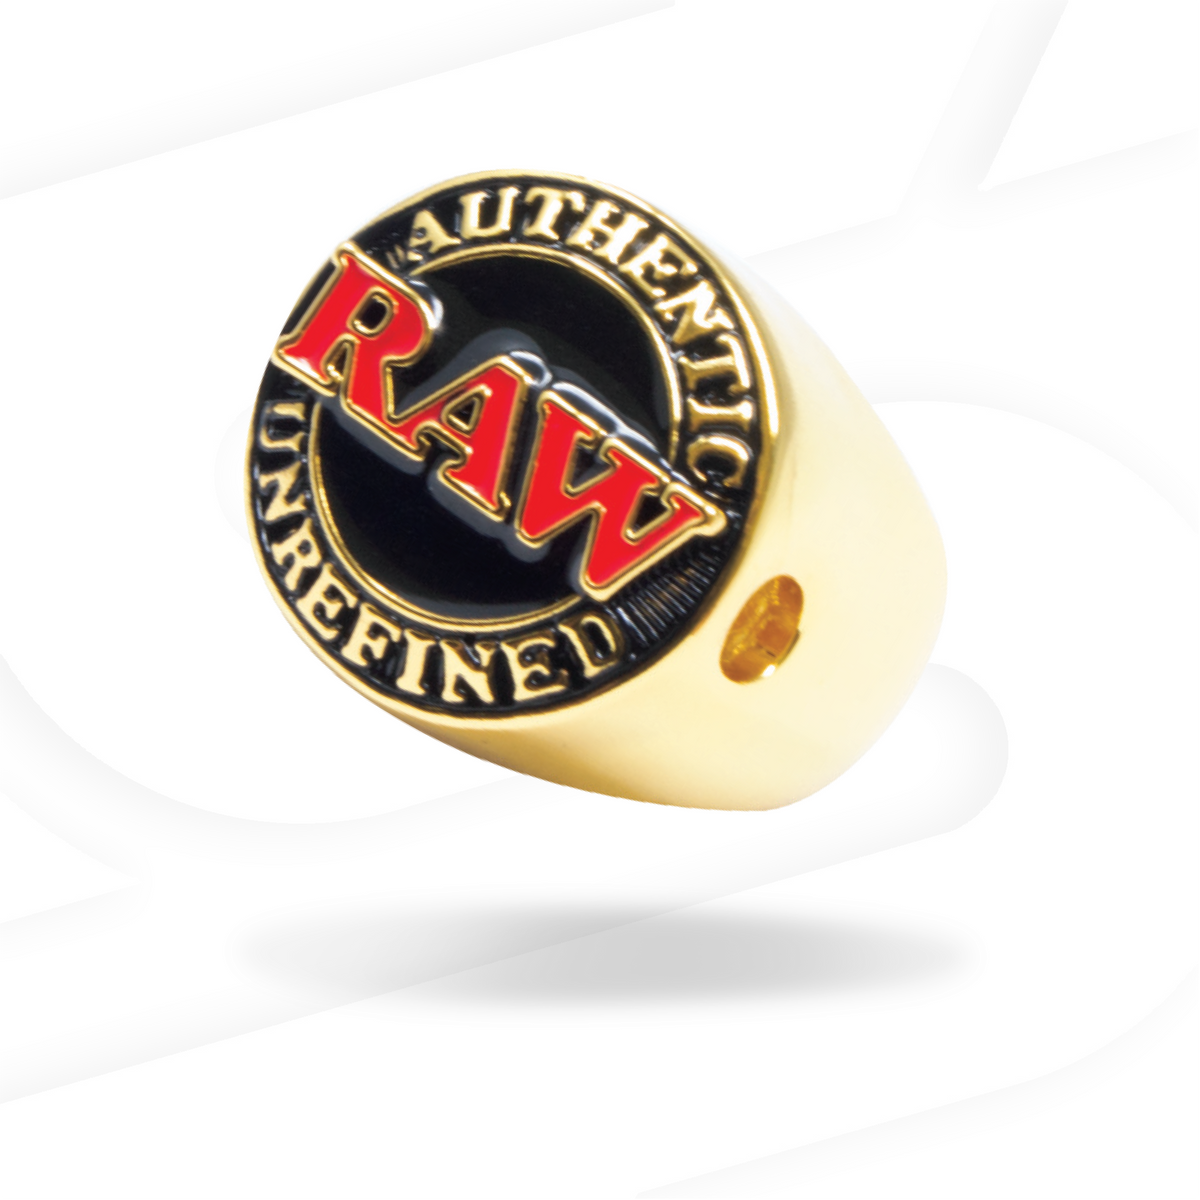 RAW Championship Ring Lifestyle esd-official